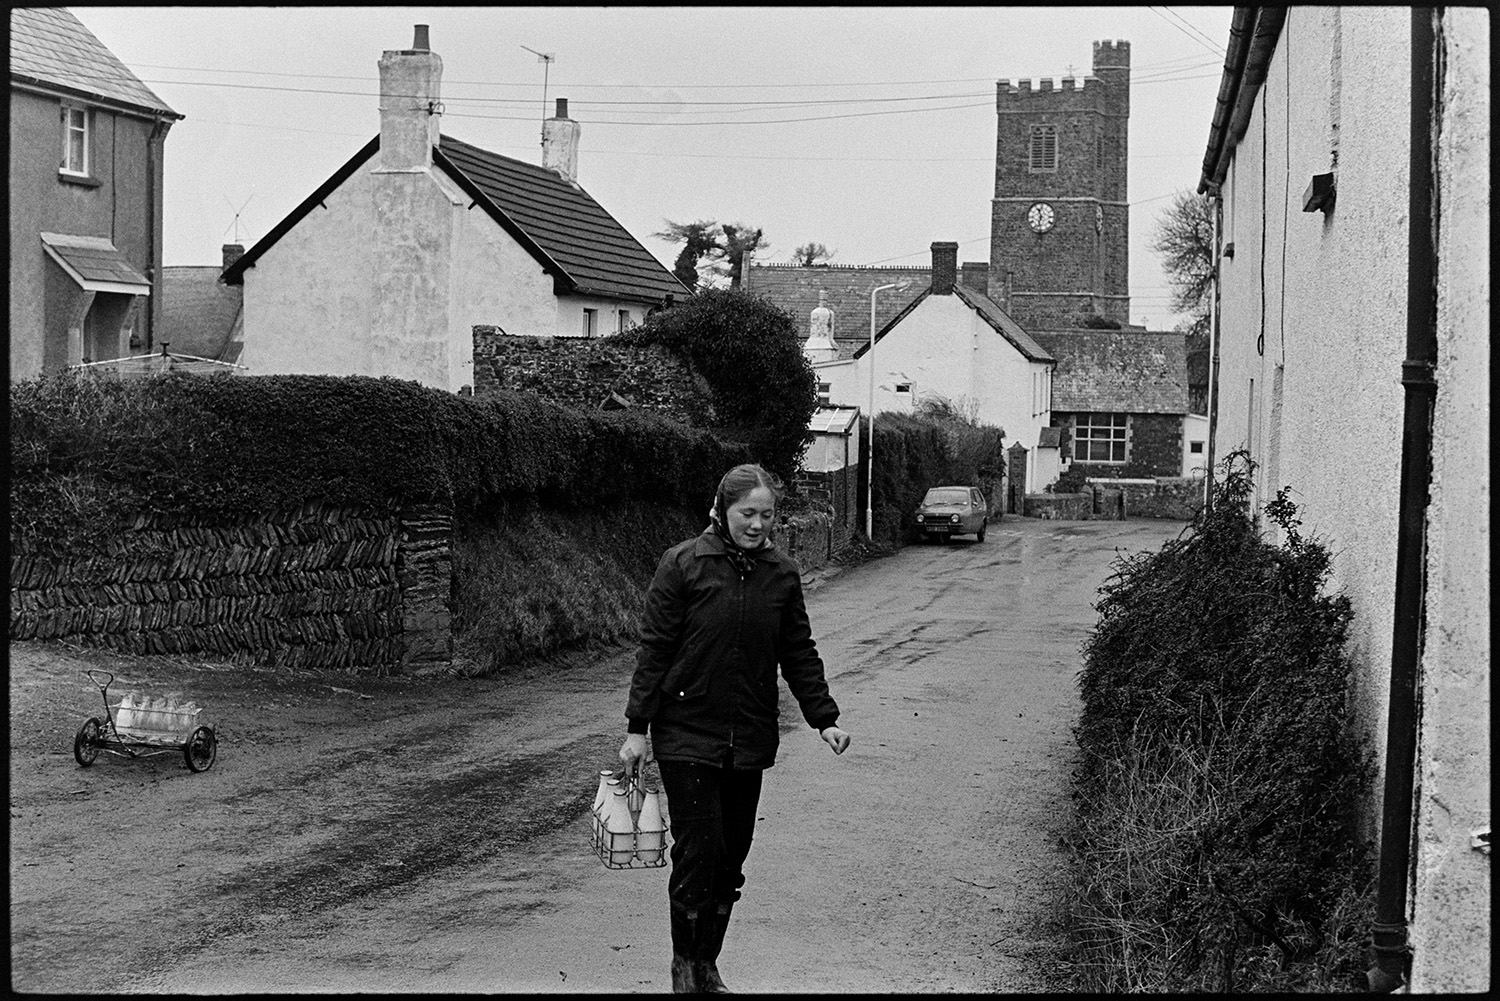 Woman doing milk round in village, chatting to customers. <br />
[Jane Woolacott delivering milk to houses in Atherington. She is transporting the milk bottles using a trolley. The church tower is visible in the background.]